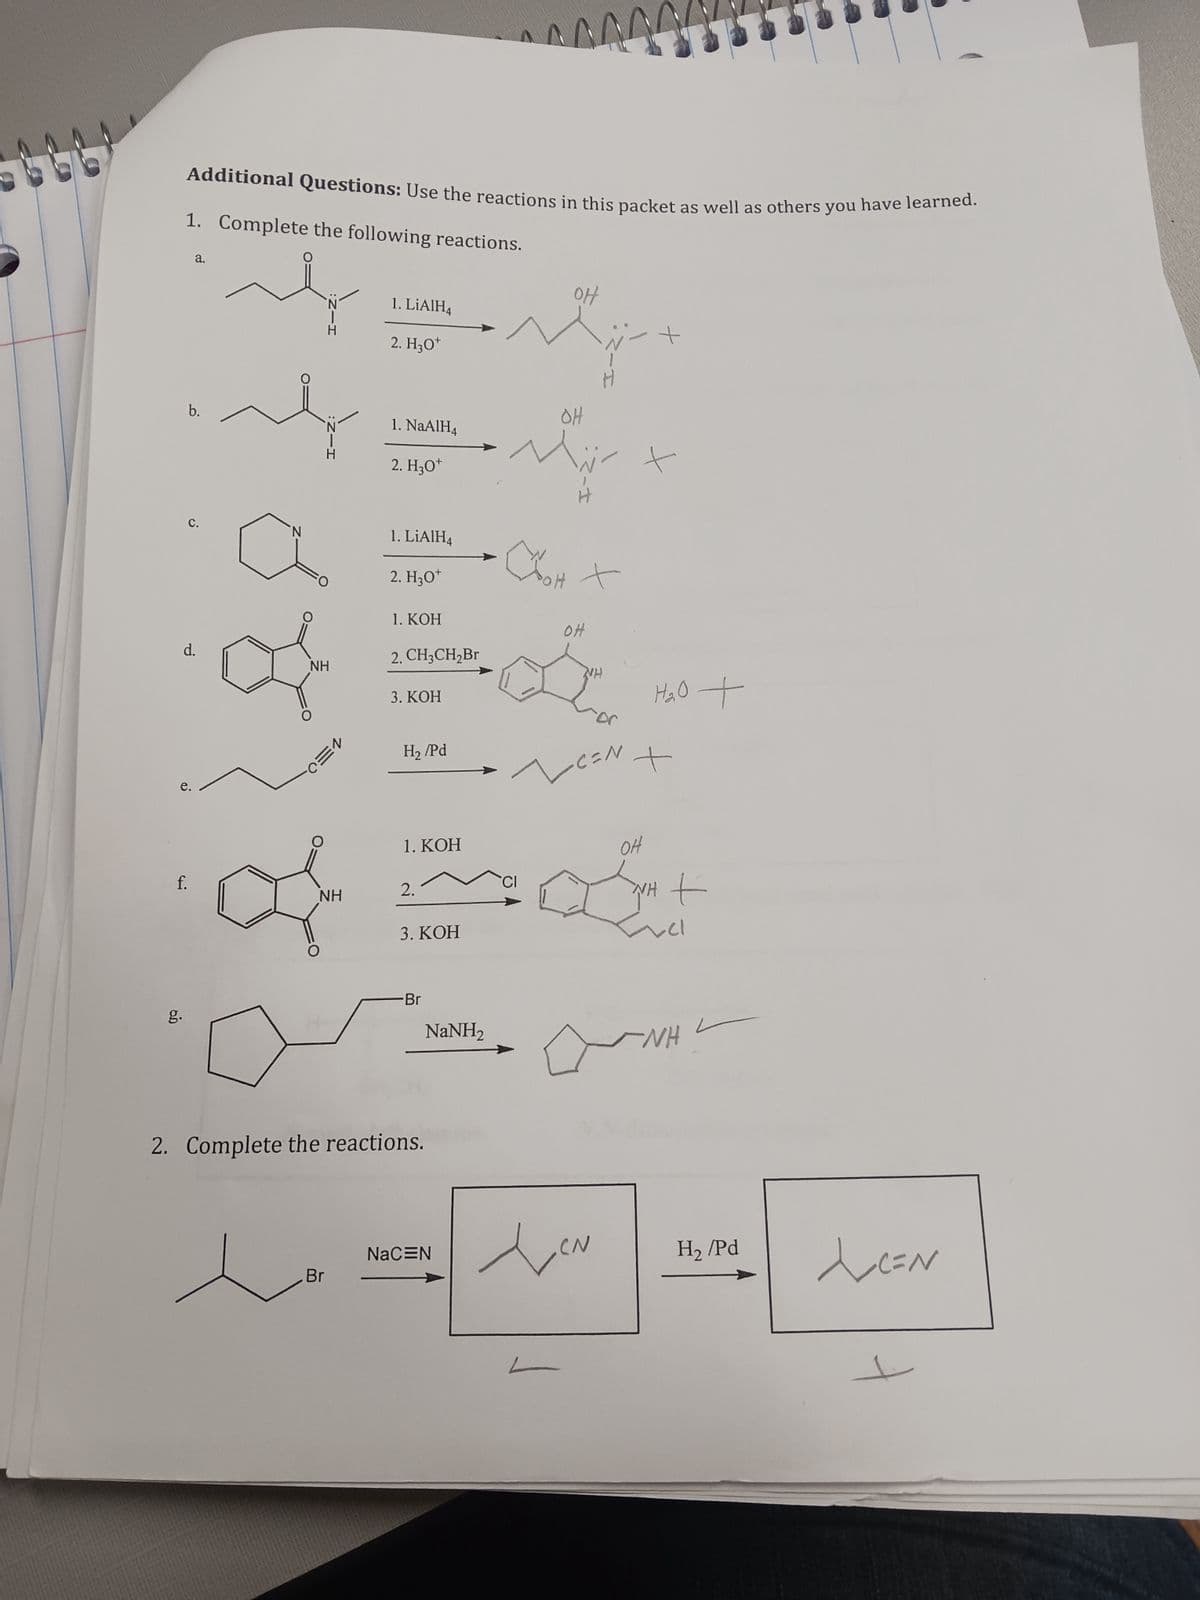 66
Additional Questions: Use the reactions in this packet as well as others you have learned.
1. Complete the following reactions.
فه
b.
a.
C.
o
d.
f.
N
HIN:
NH
NEO-
NH
Br
1. LiAlH4
2. H30¹
1. NaAlH4
2. H3O+
1. LiAlH4
2. H30*
1. KOH
2. CH3CH₂Br
3. КОН
H₂/Pd
1. KOH
2.
3. KOH
Br
2. Complete the reactions.
NaNH,
NaCEN
OH
OH
SOH +
OH
NH
Na
-C=N +
H₂O +
OH
WH
YH t
vel
NH
H₂/Pd
N تار